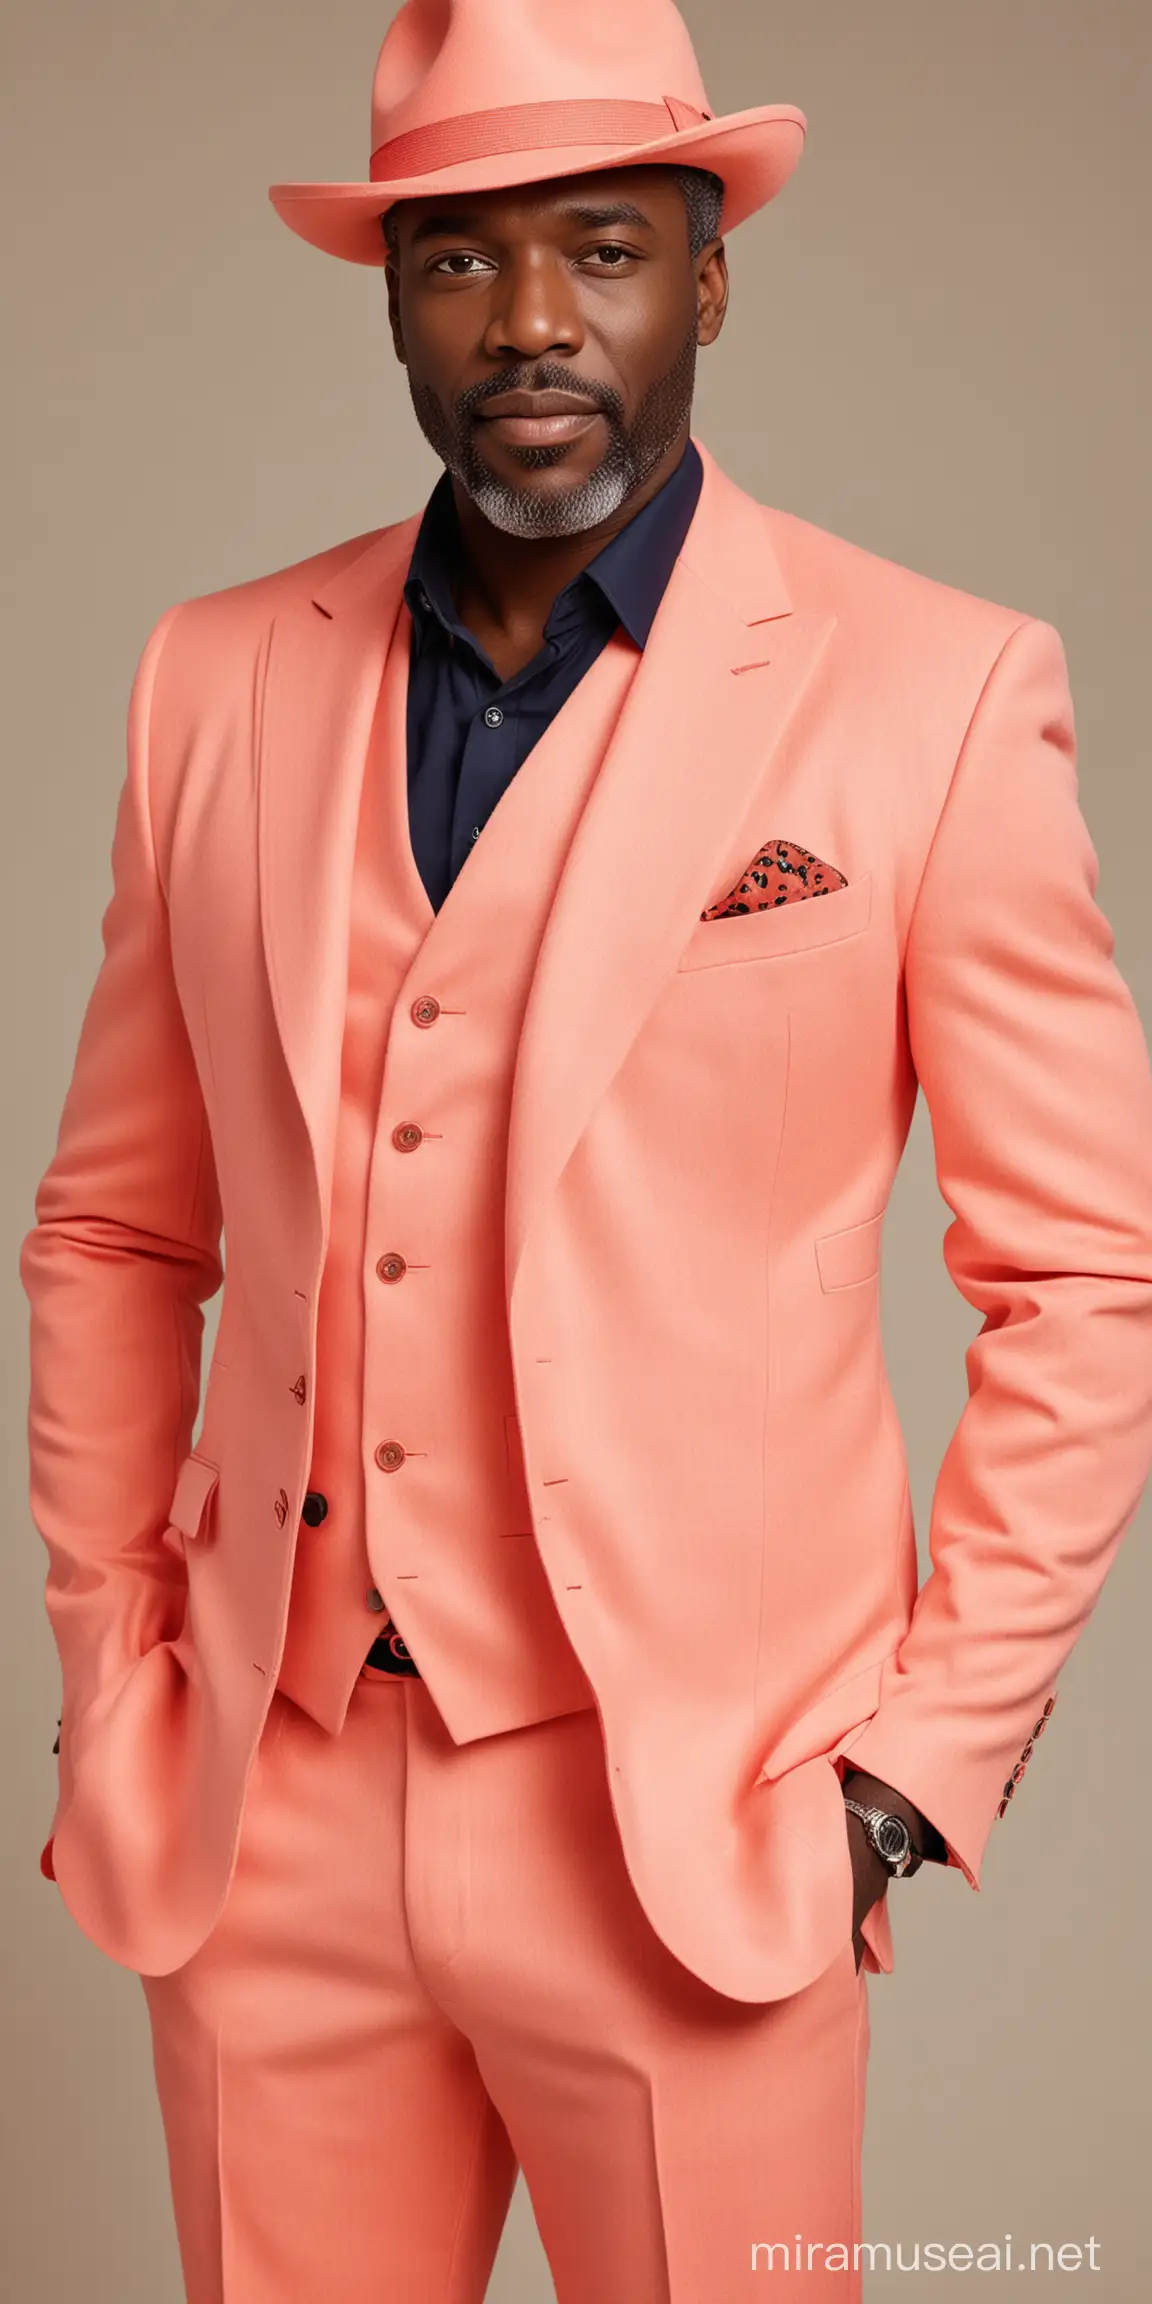 Stylish Middleaged Black Man in Coral Suit and Trilby Hat